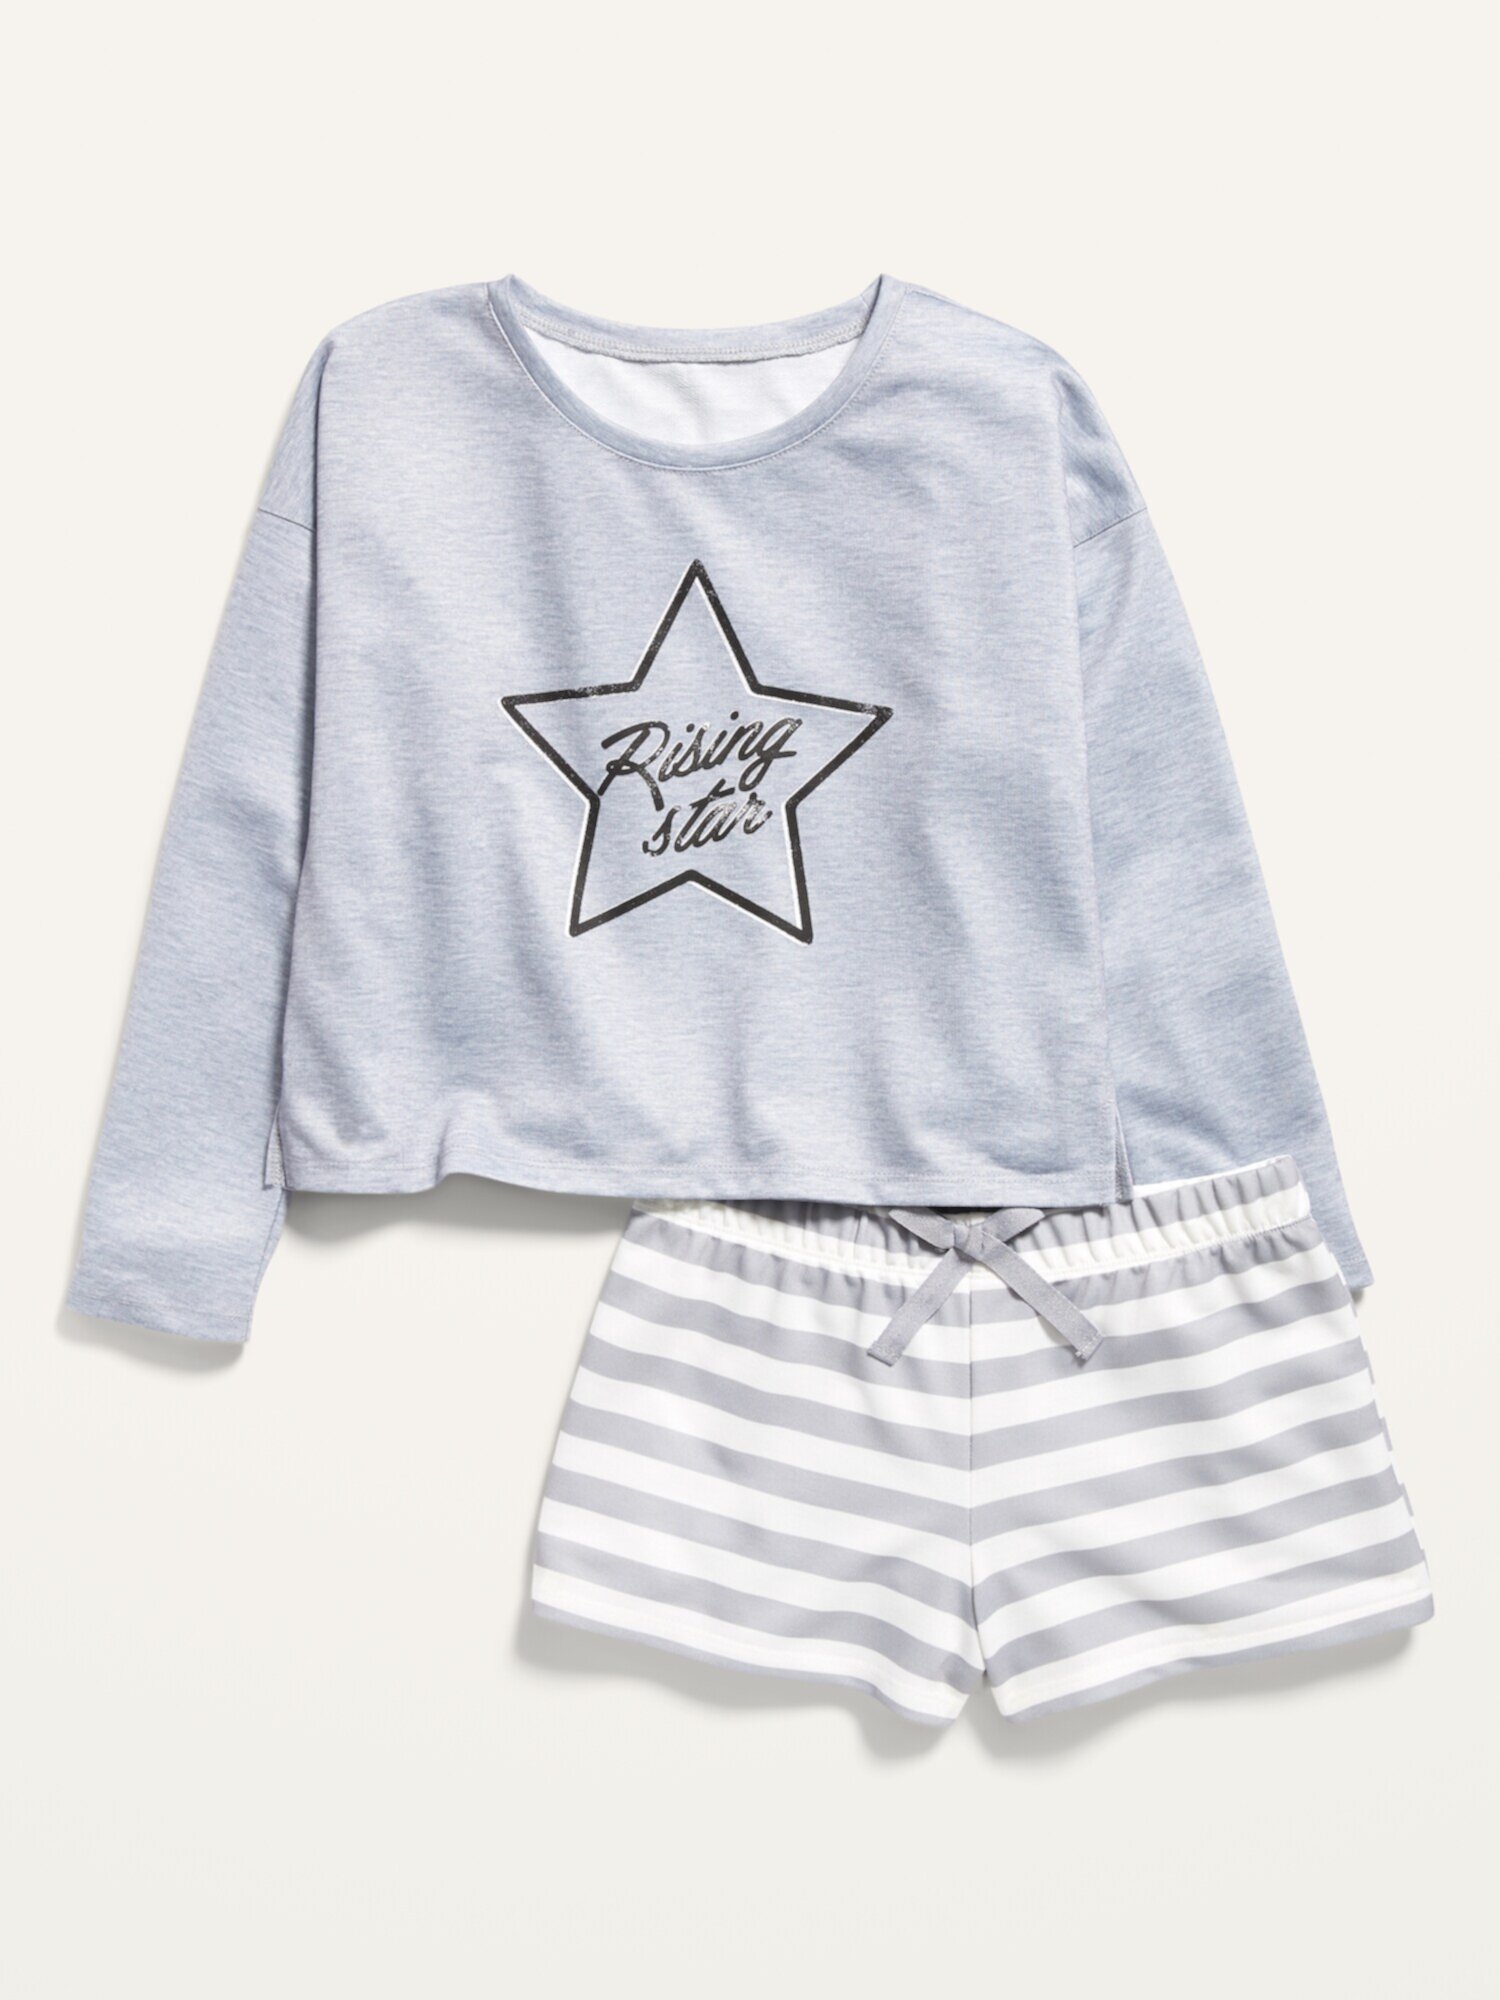 French Terry Pajama Top & Pajama Shorts Set for Girls Old Navy